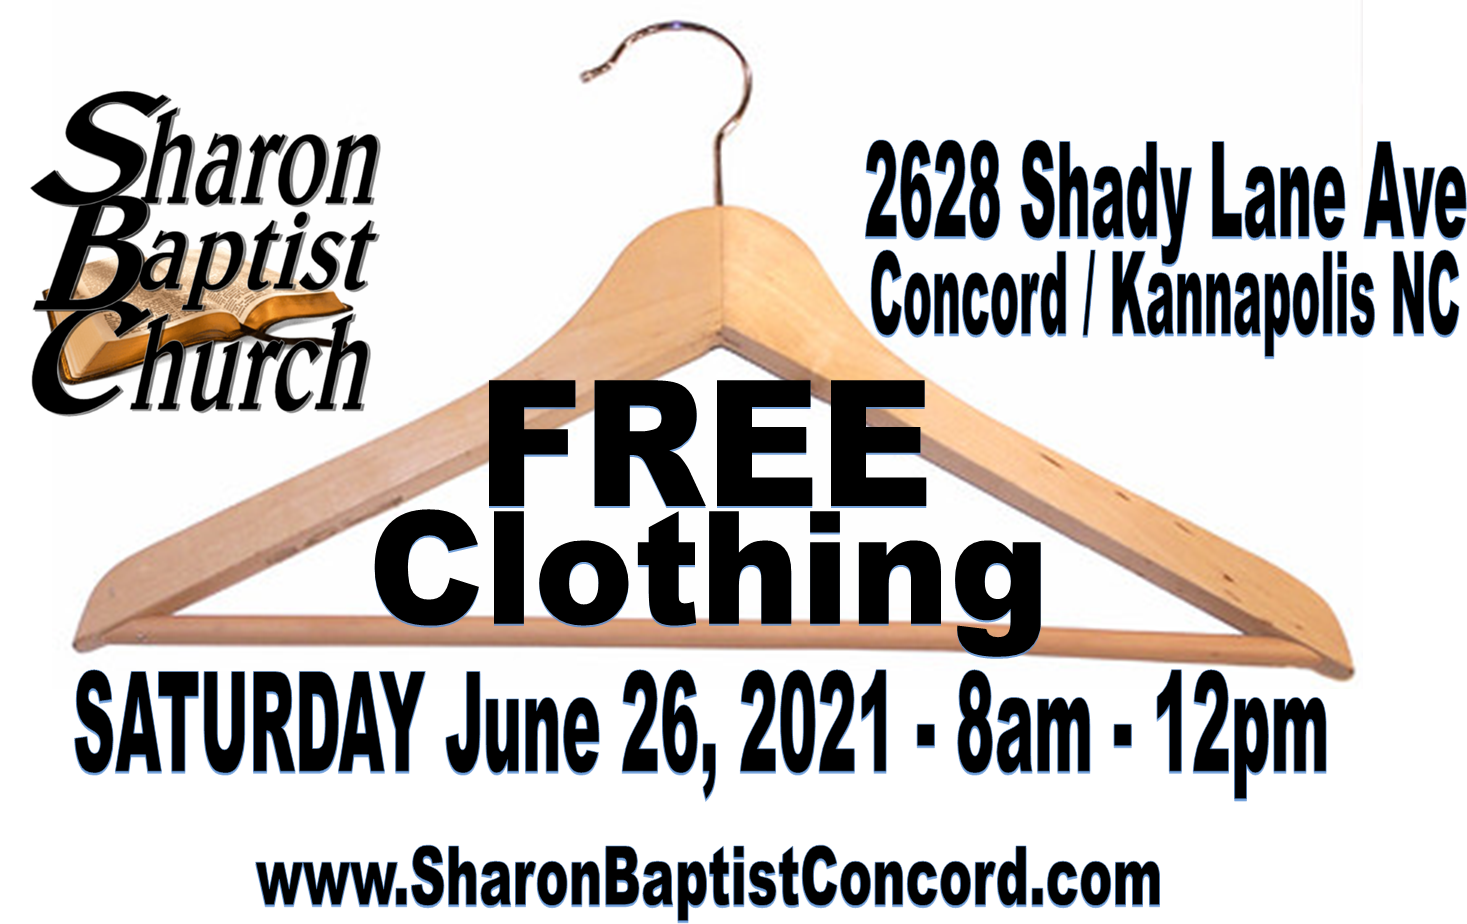 FREE Clothing for those in need on Saturday, June 26, 2021 from 8am to 12pm at Sharon Baptist Concord / Kannapolis NC